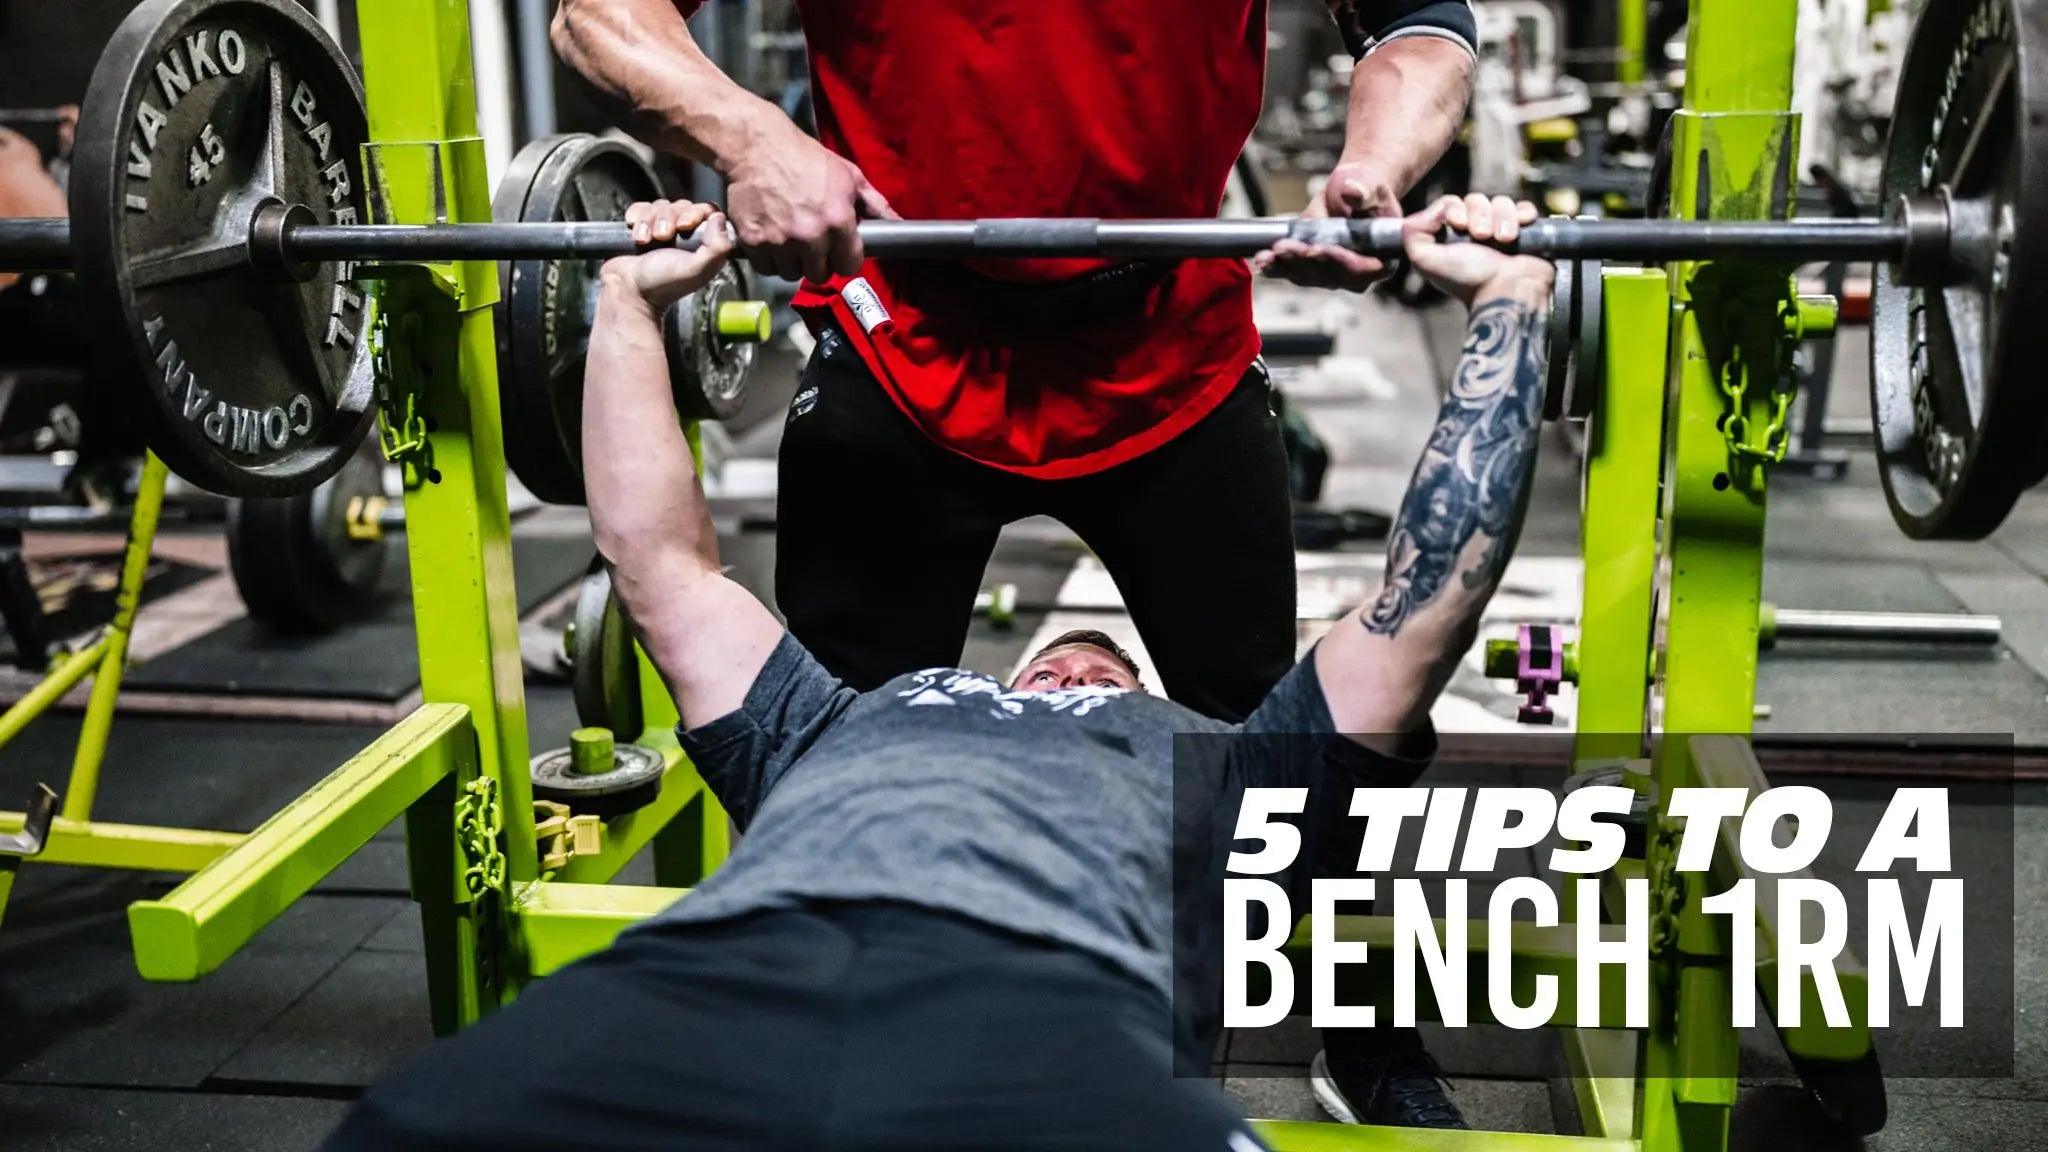 5-Tips-to-a-Bench-1RM UXO Supplements